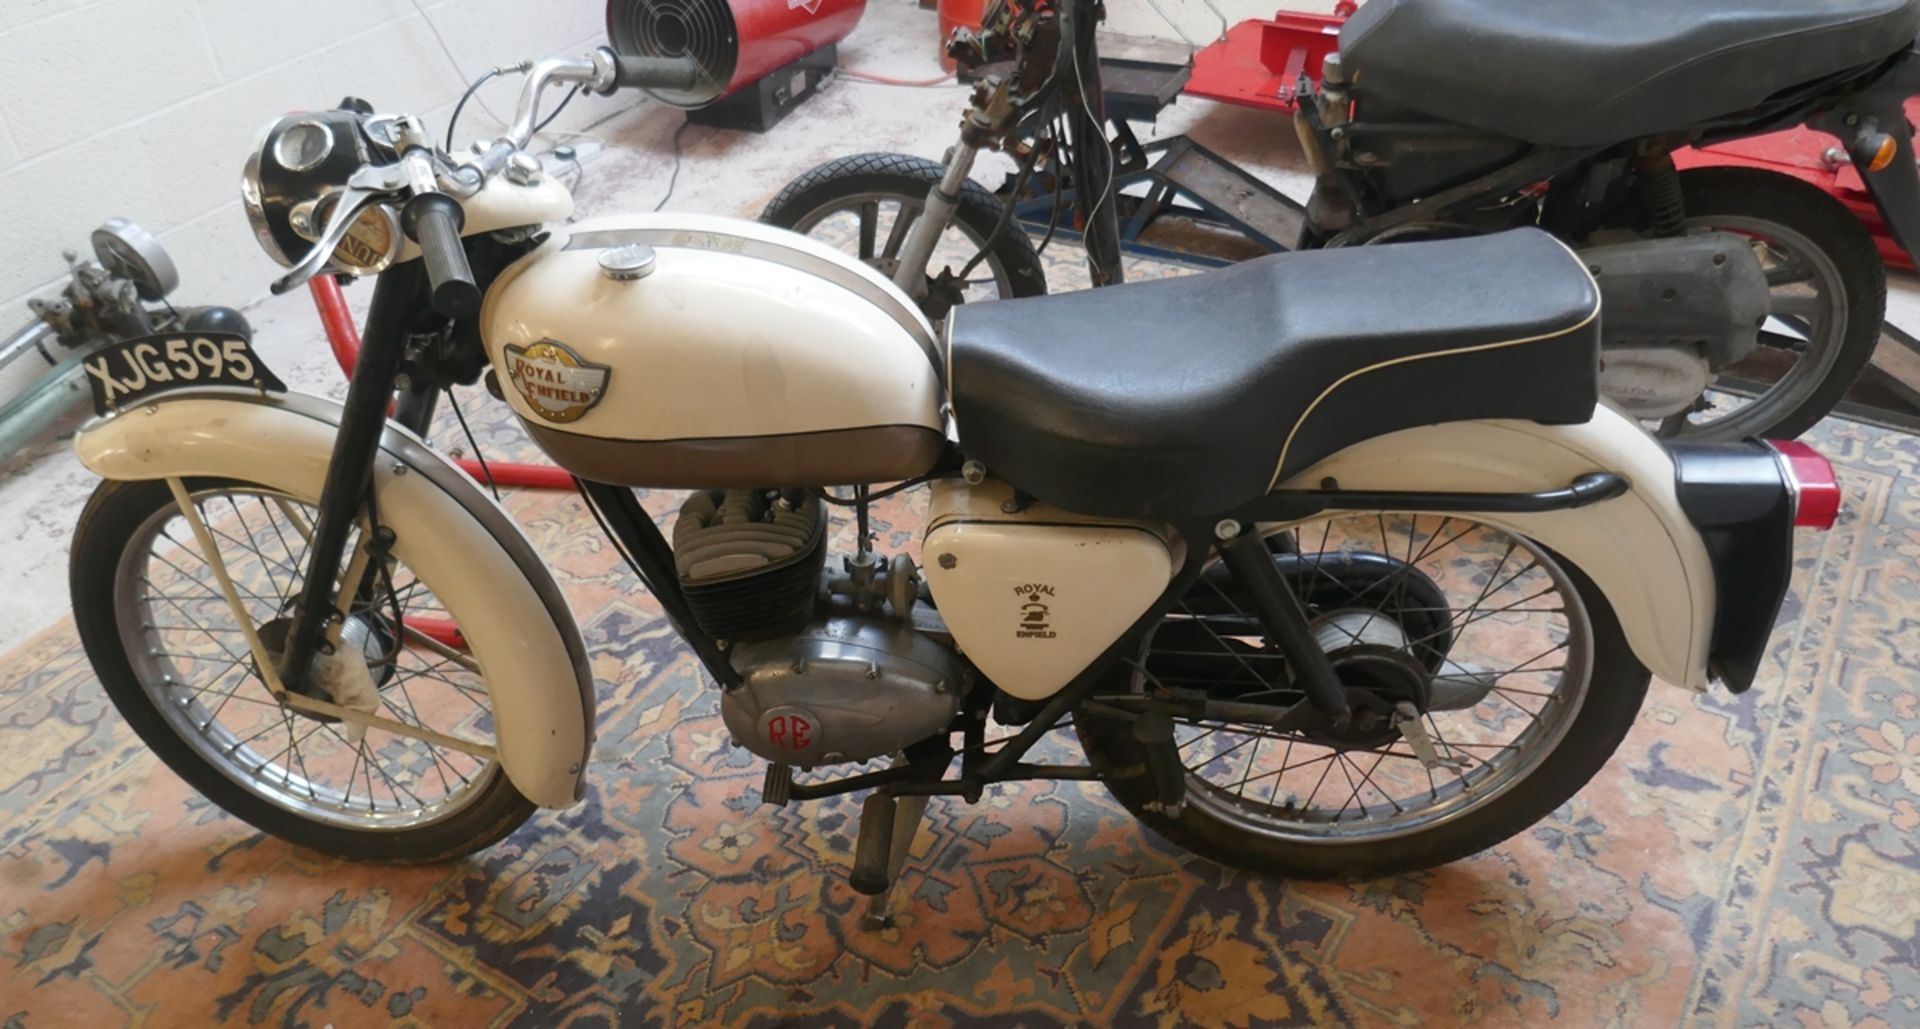 1961 Royal Enfield Prince 150cc with just 1600 miles from new